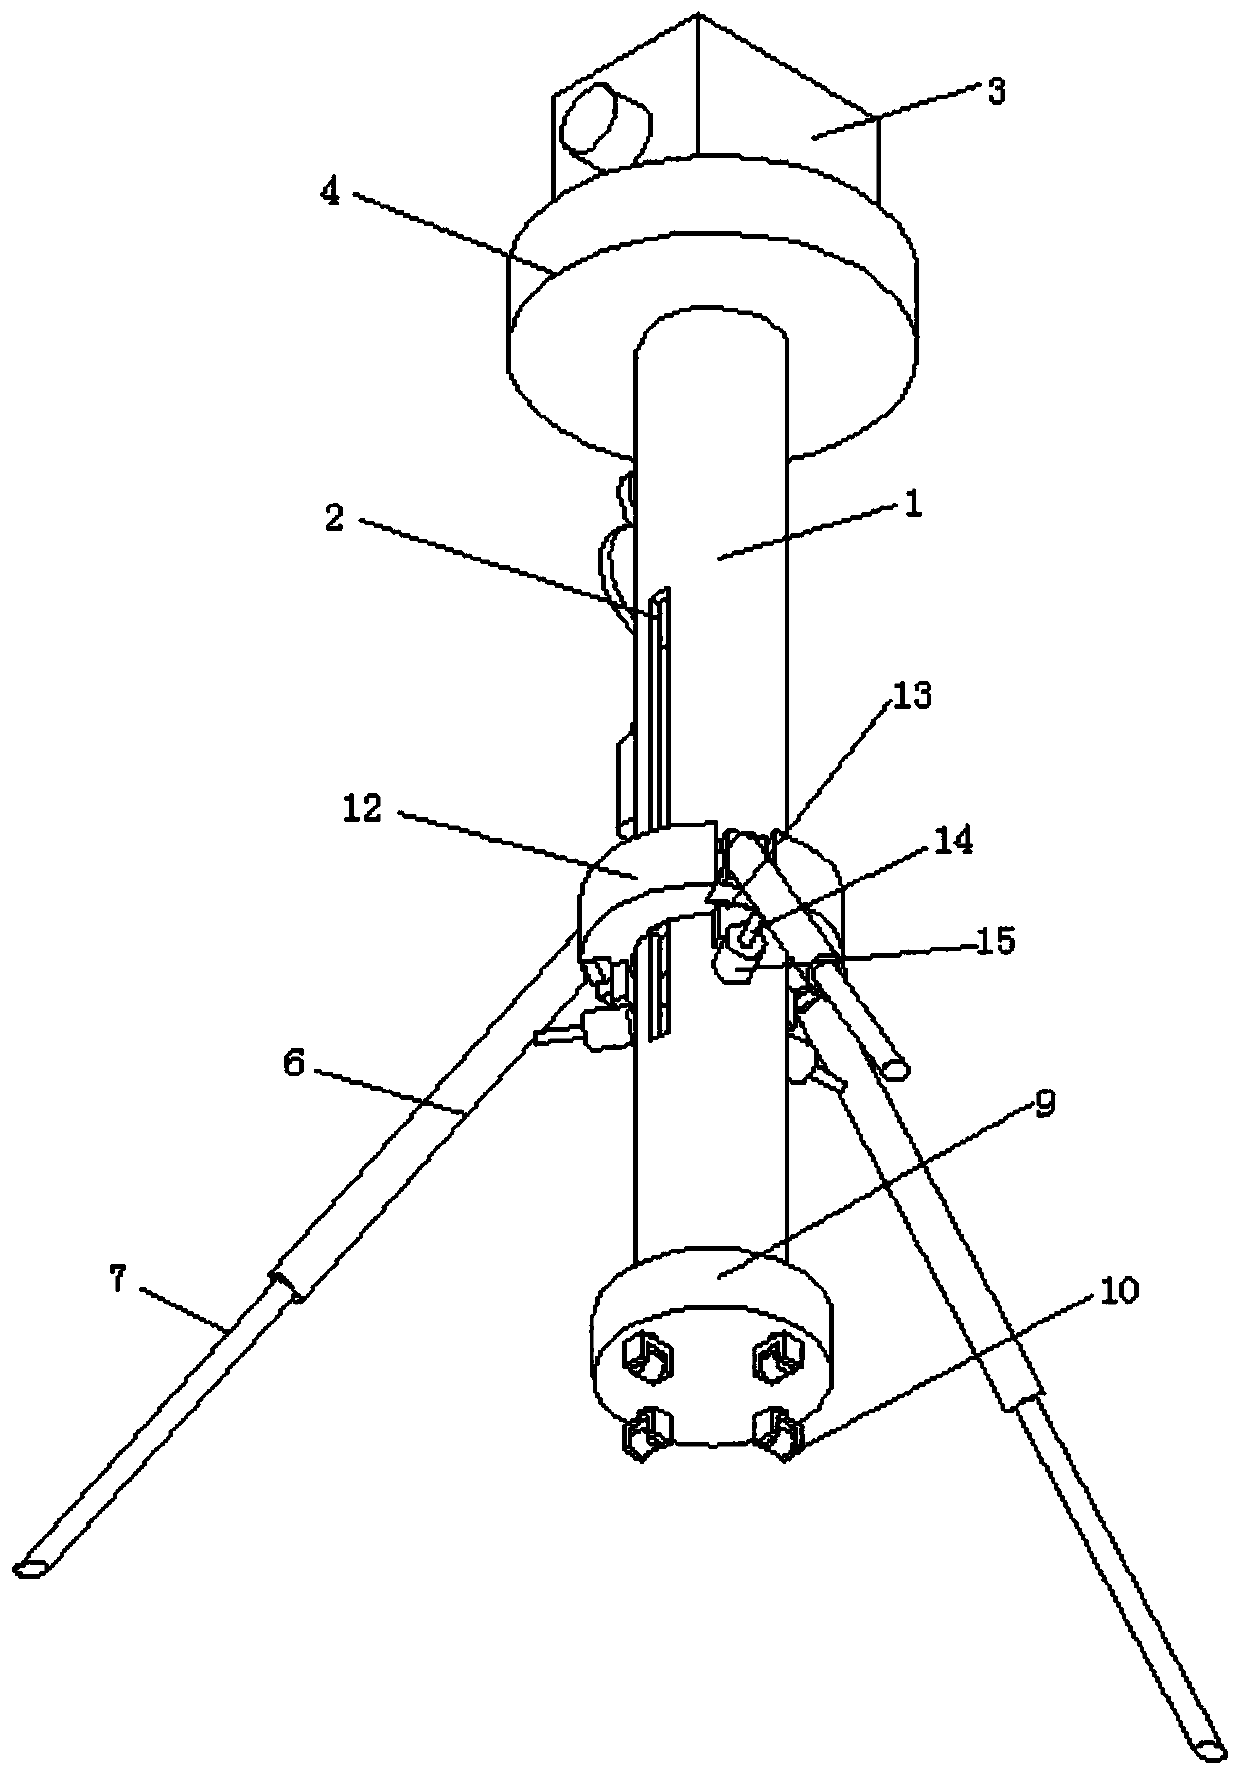 Movable speed measuring instrument